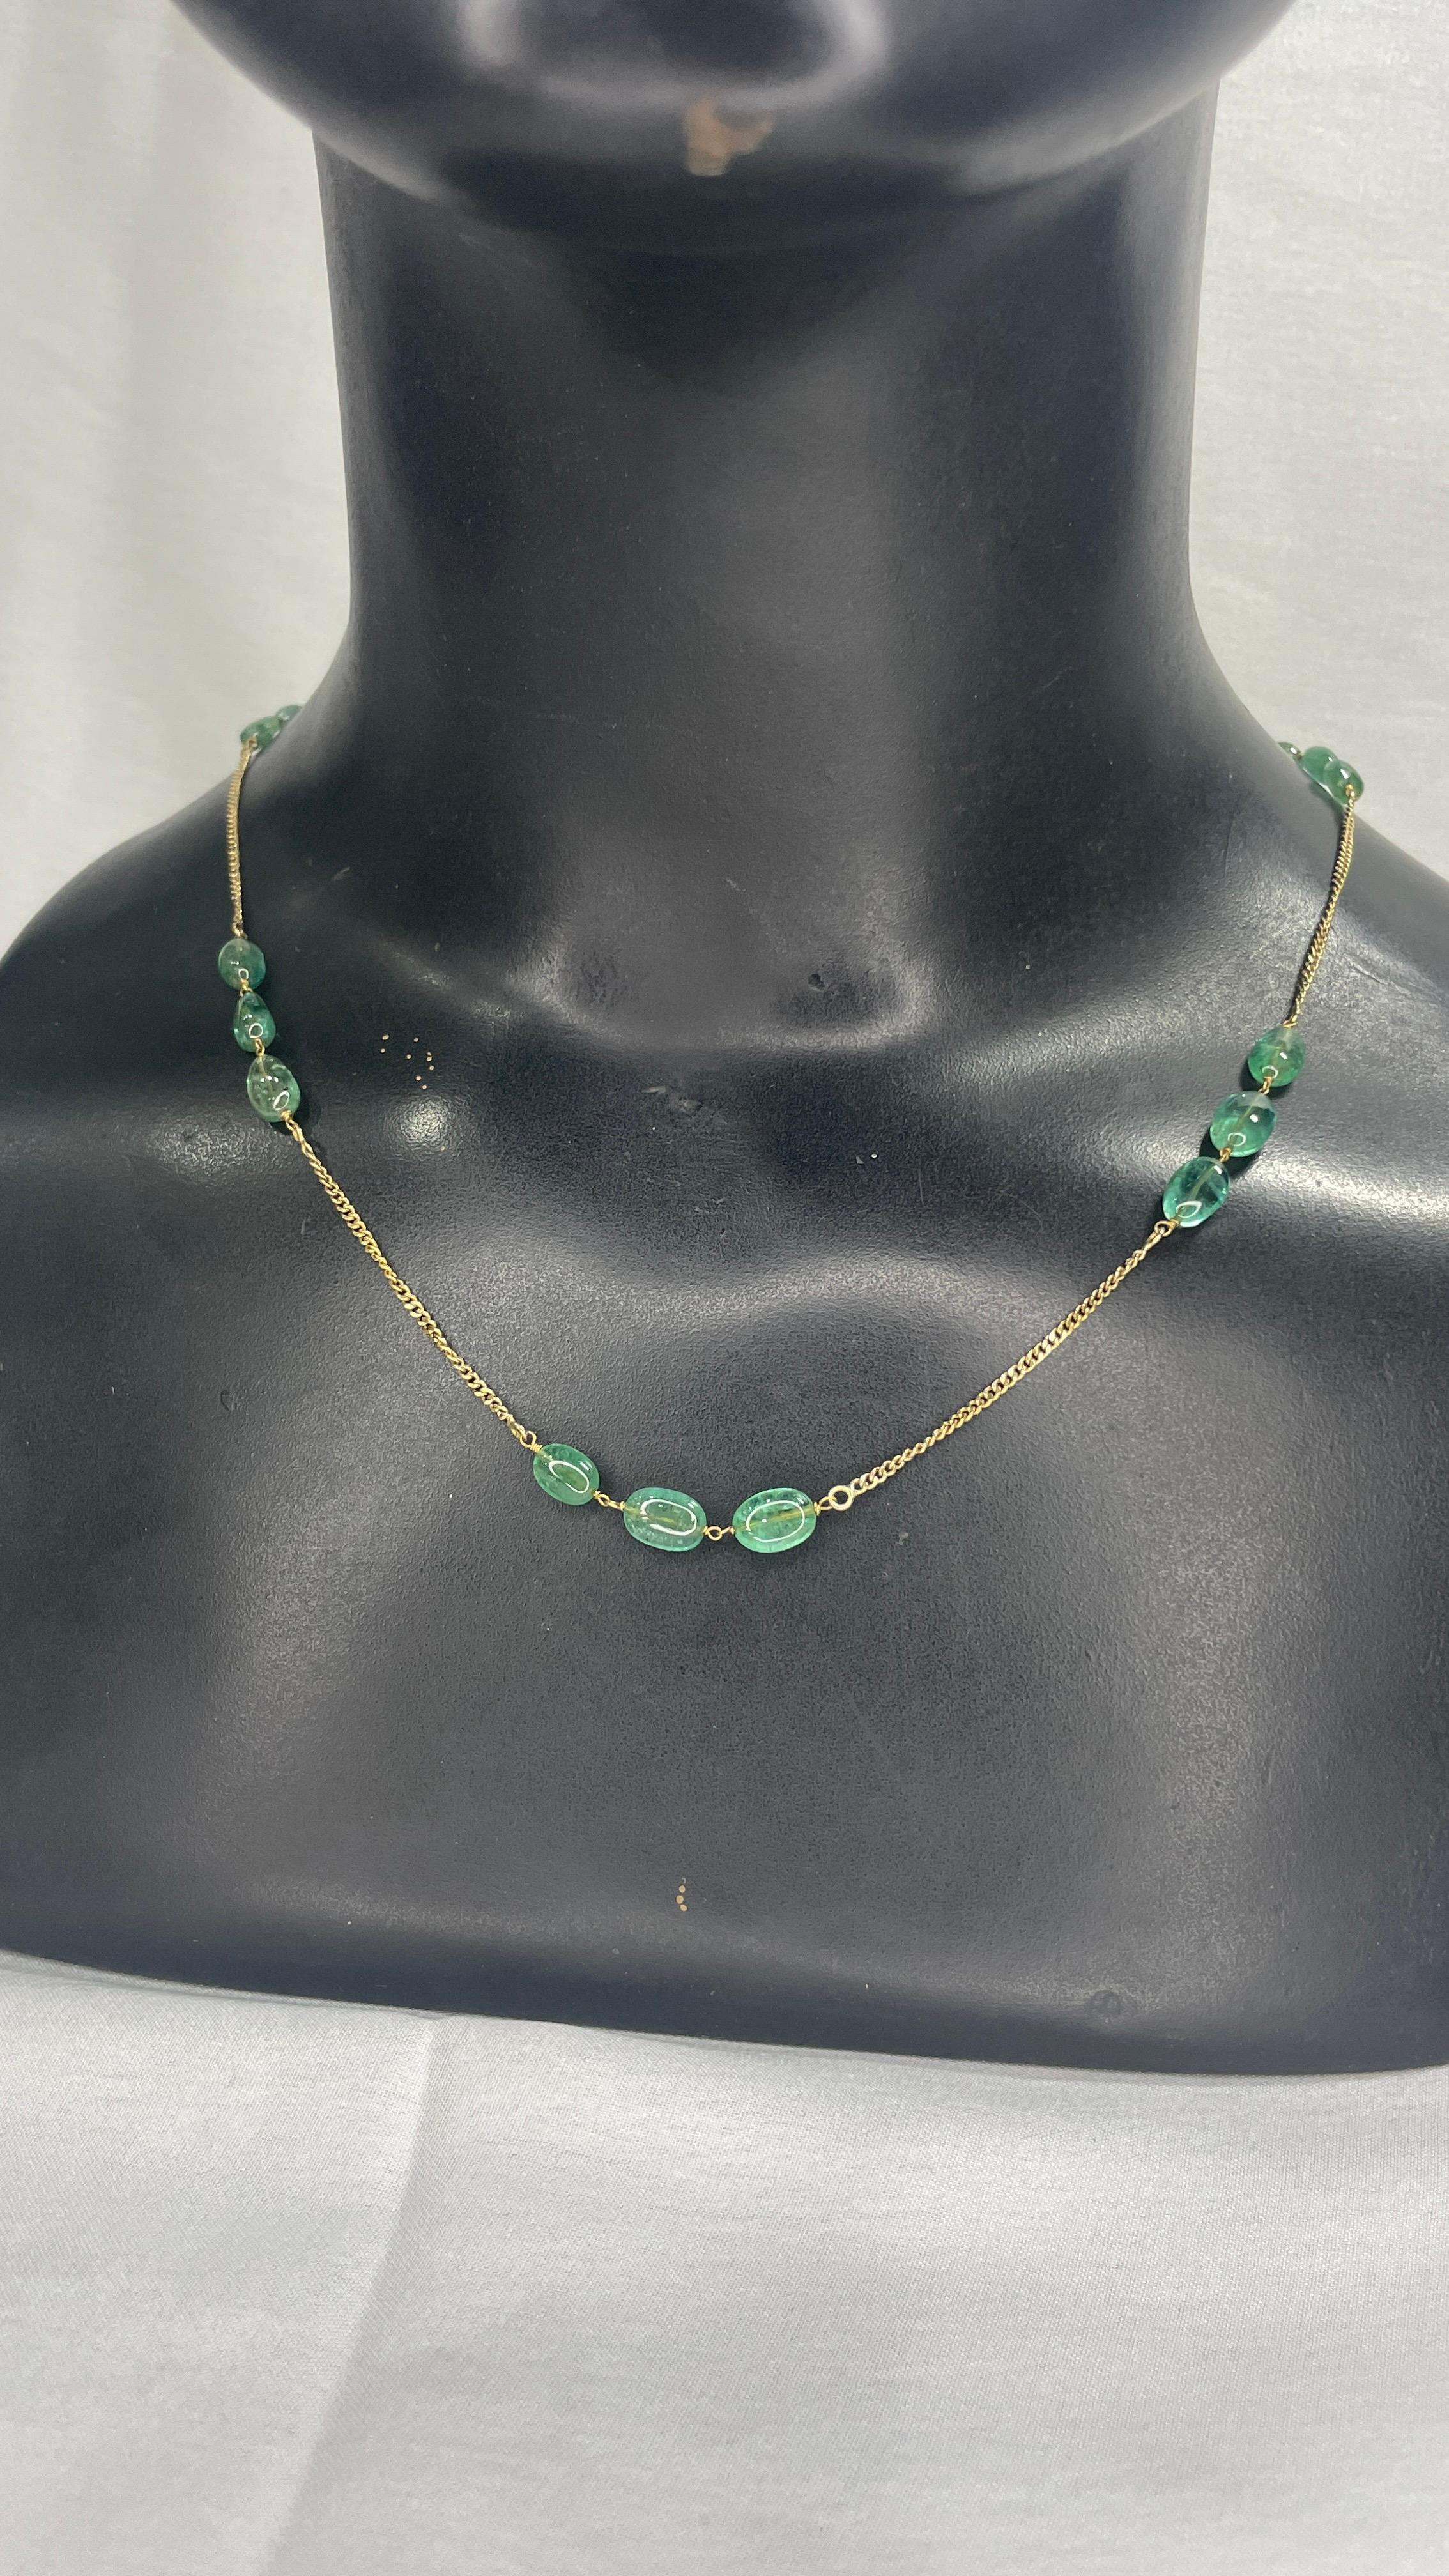 Emerald Necklace in 18K Gold studded with tumble cut emeralds.
Accessorize your look with this elegant emerald beaded necklace. This stunning piece of jewelry instantly elevates a casual look or dressy outfit. Comfortable and easy to wear, it is